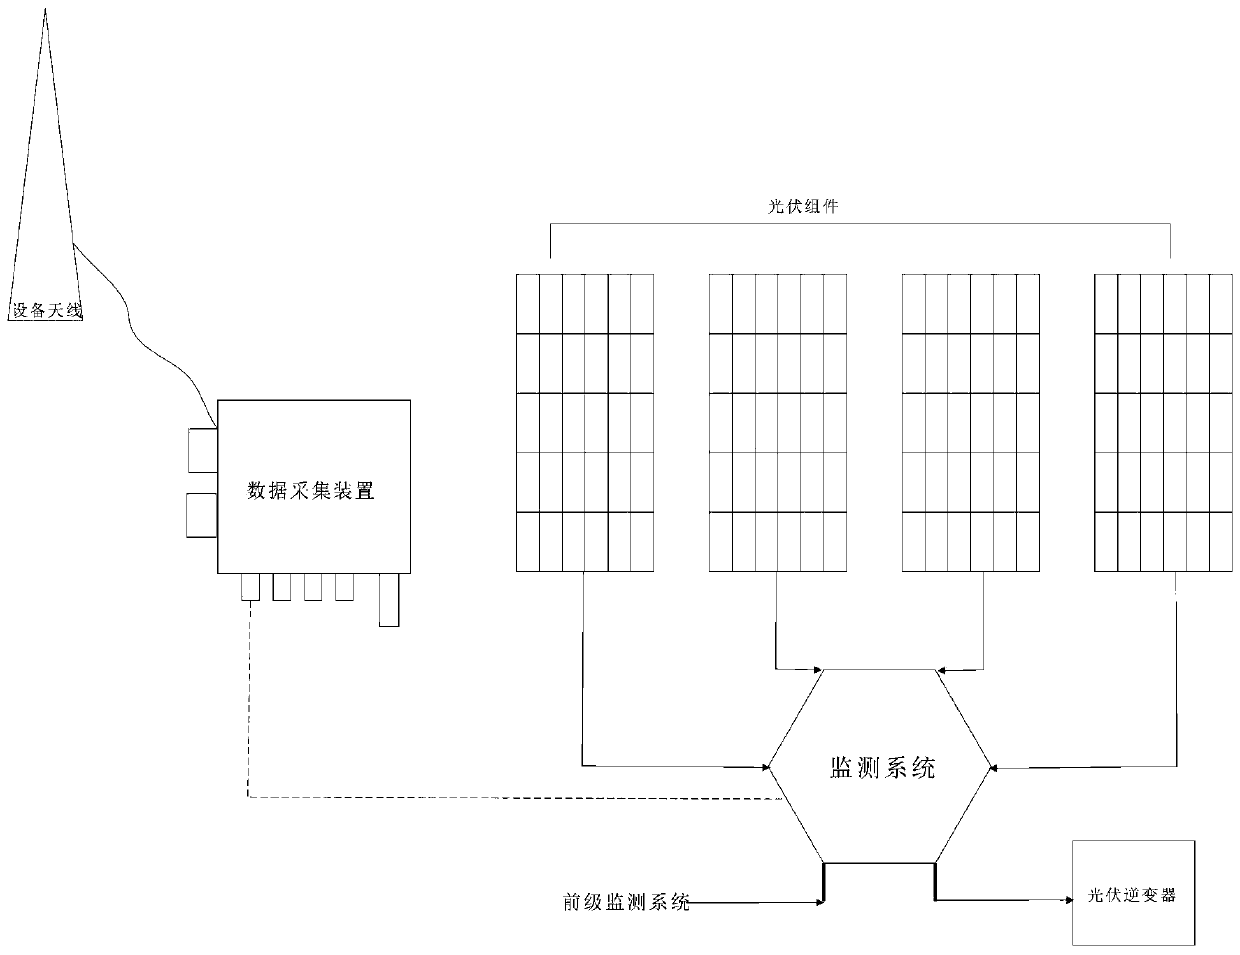 On-line monitoring system for electrical performance of multi-channel photovoltaic module